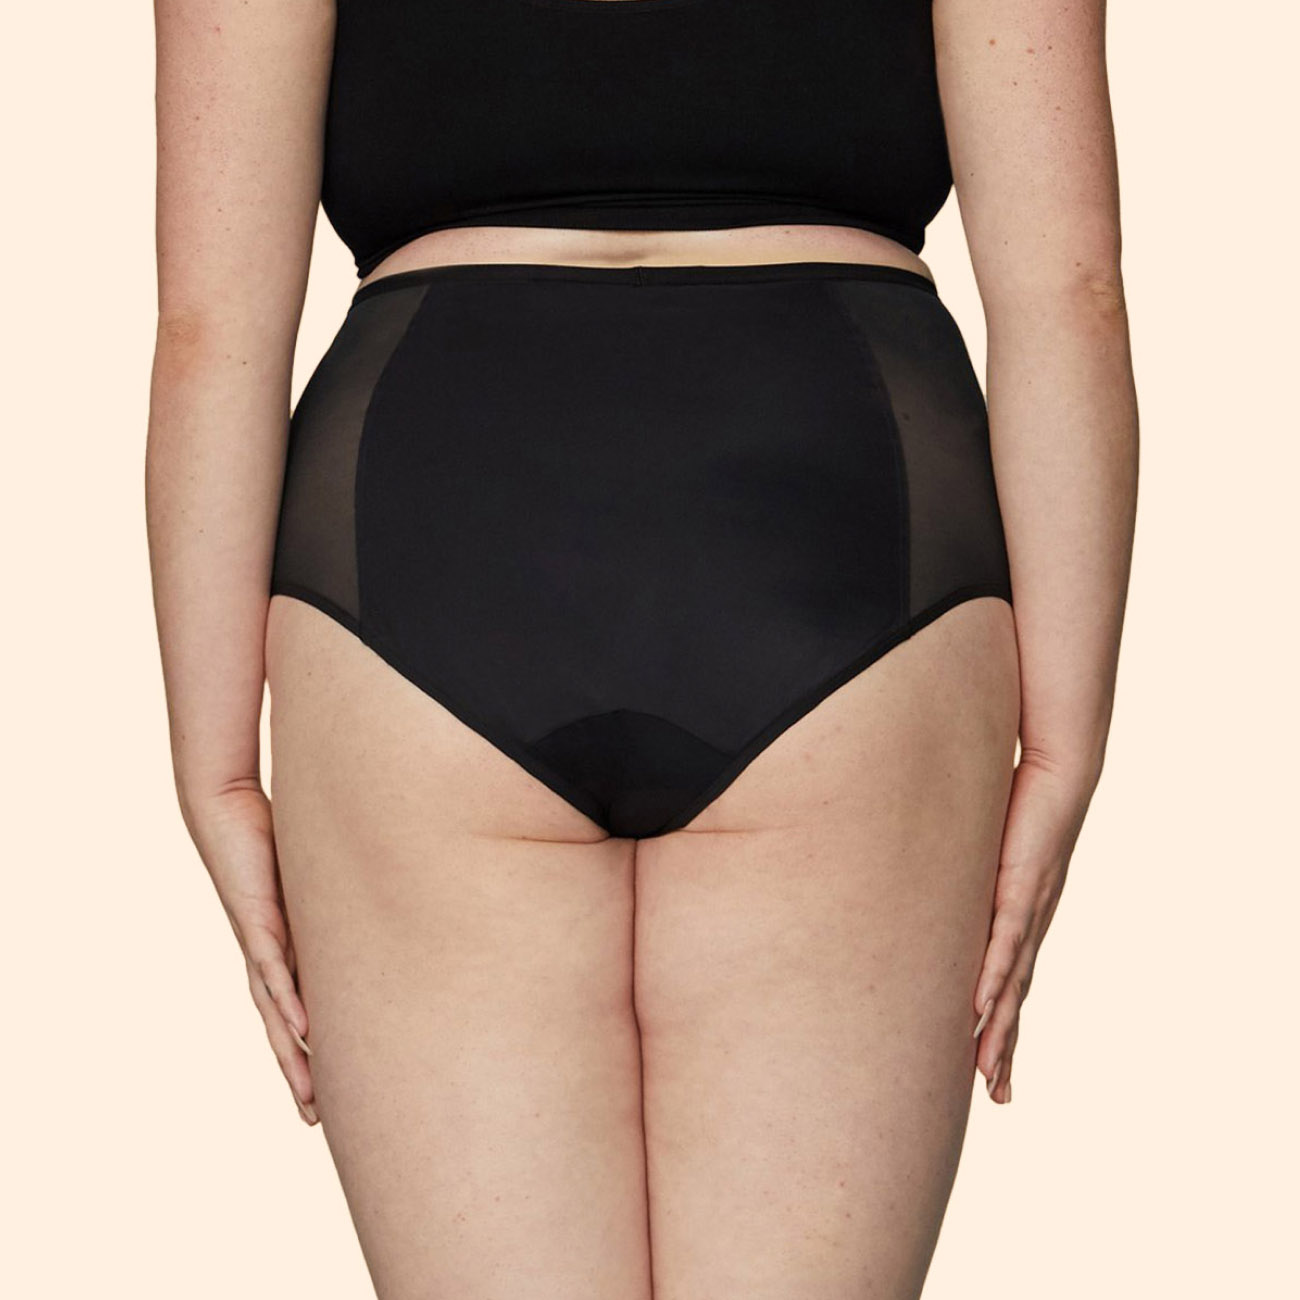 Thinx for All Period Underwear, Black Hi-Waist, Super Absorbency, XS Extra  Small